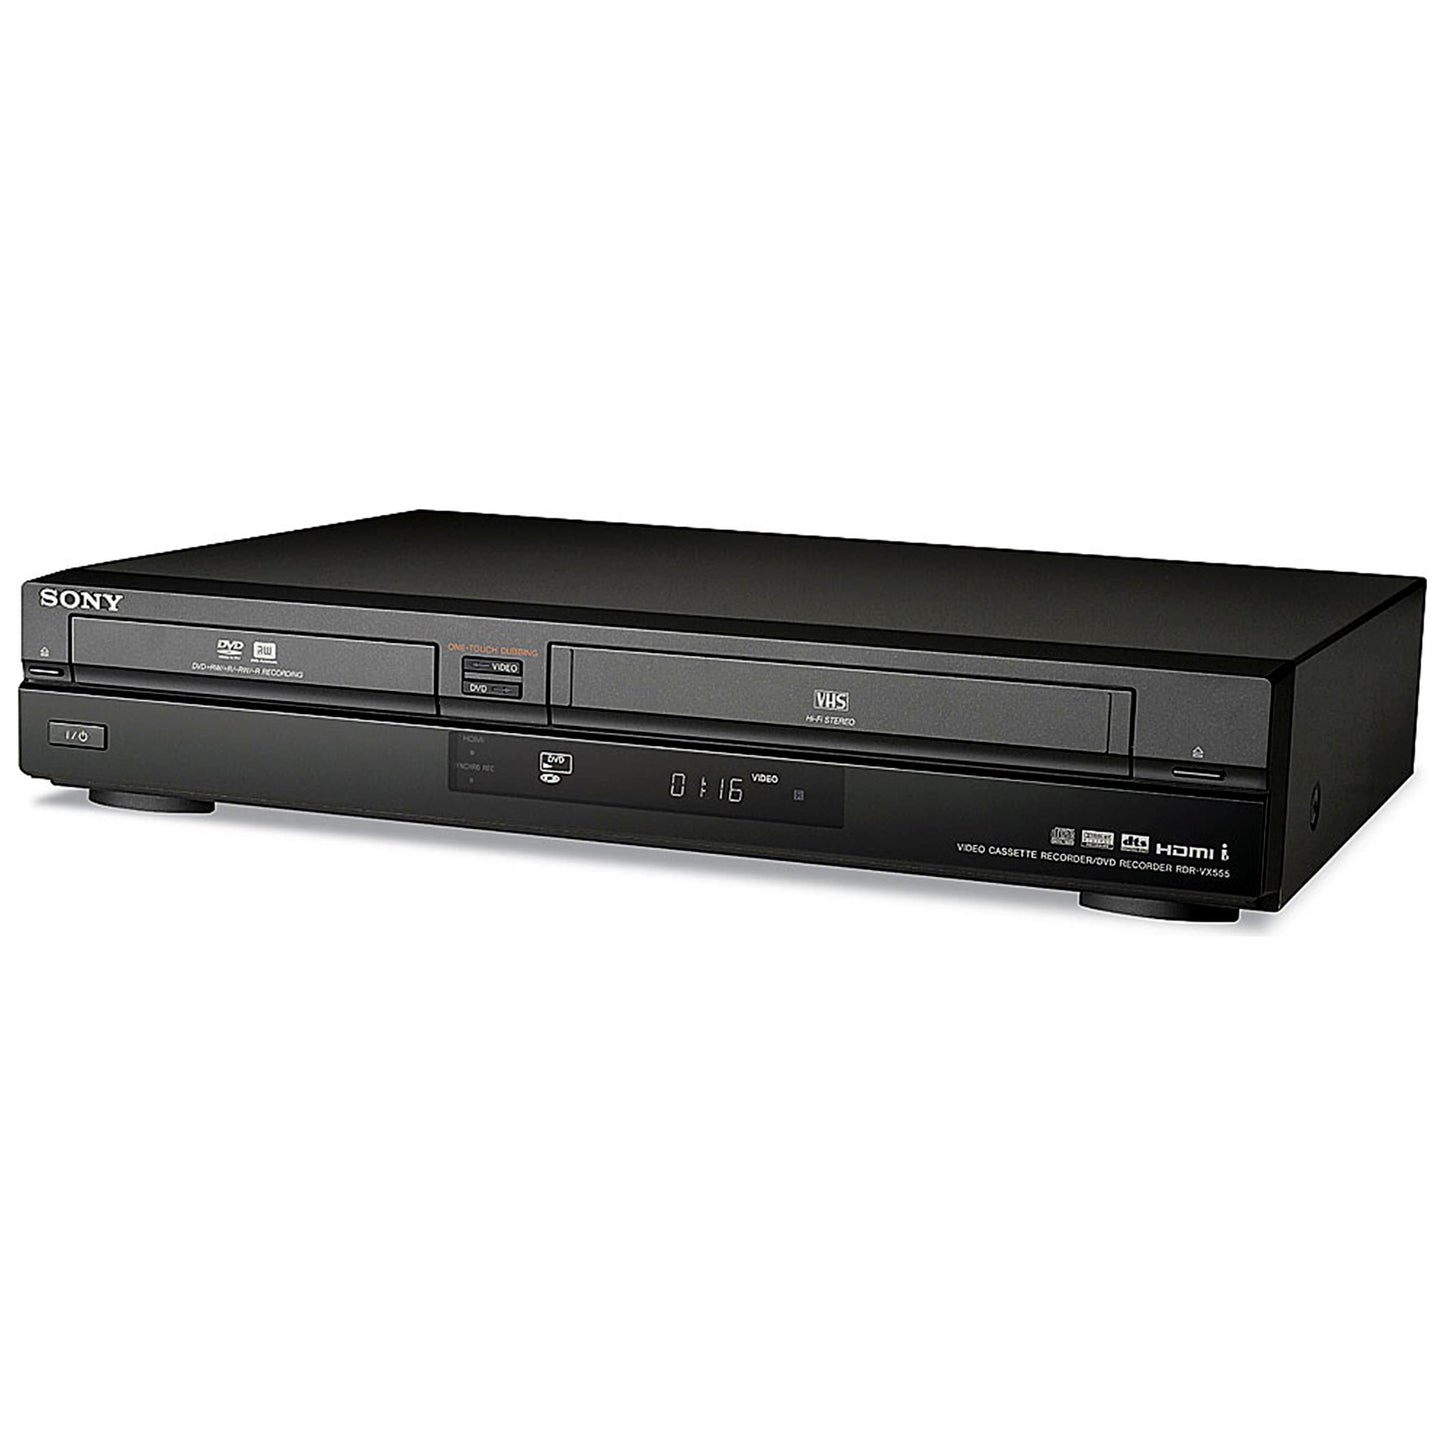 Sony RDR-VX555 VCR/DVD Recorder Combo with HDMI